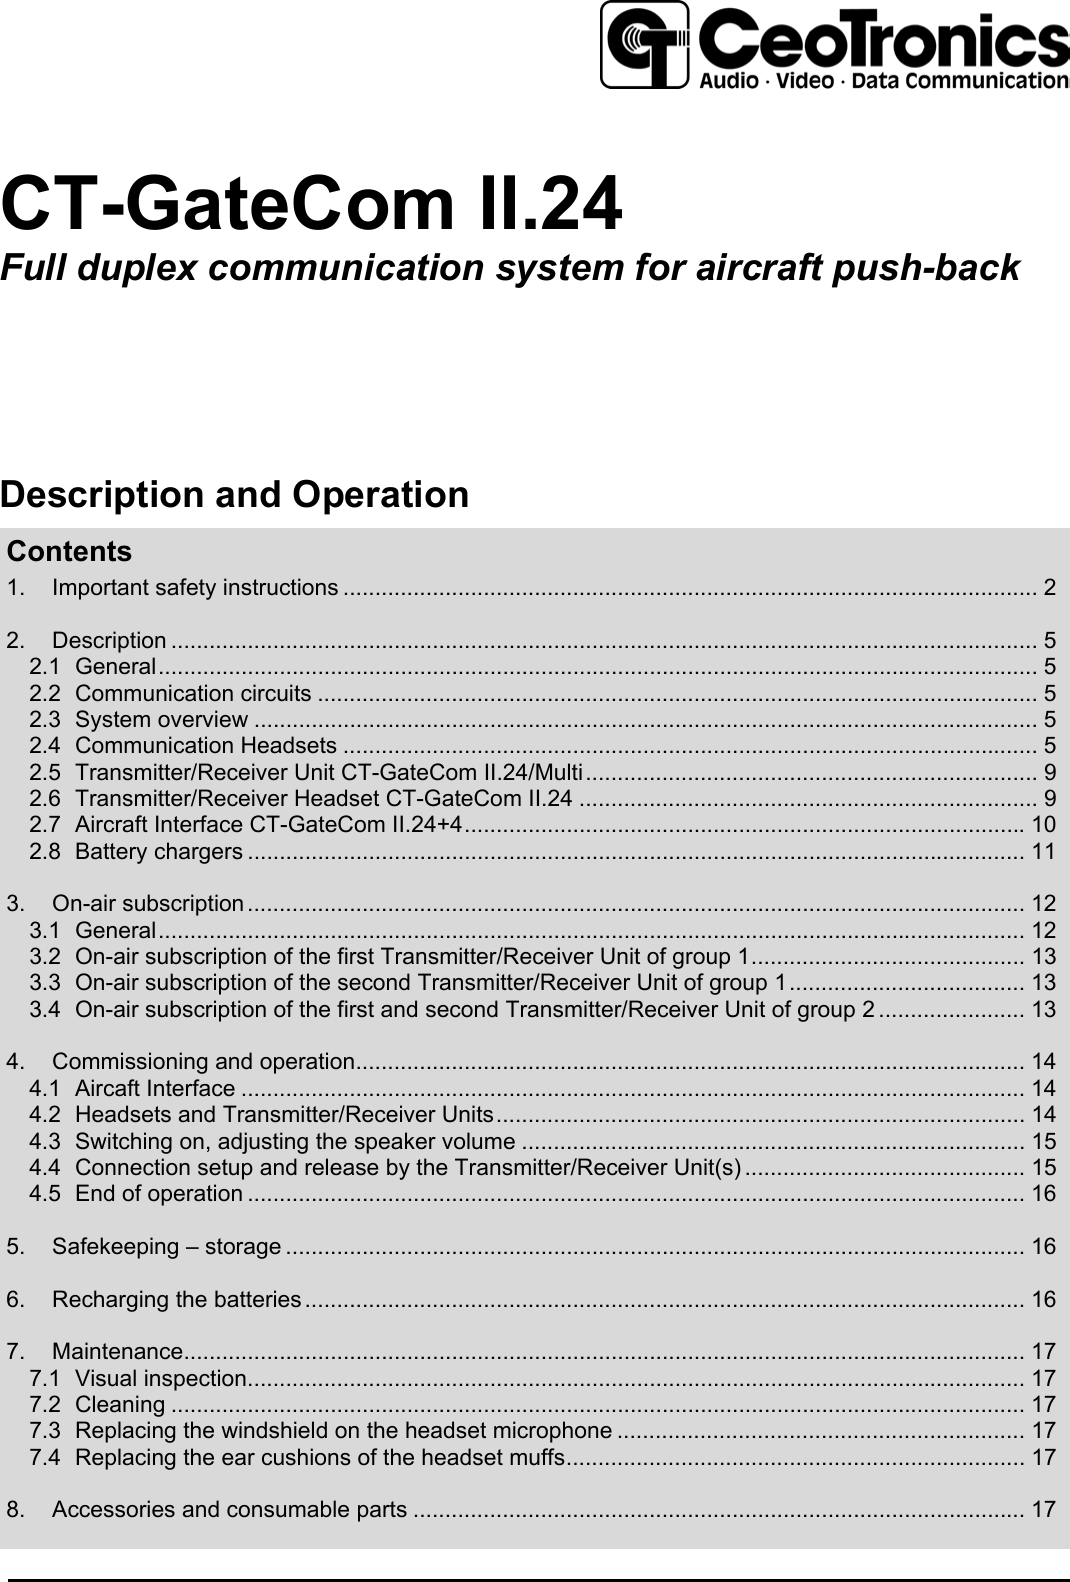 CT-GateCom II.24Full duplex communication system for aircraft push-backDescription and OperationContents1. Important safety instructions ............................................................................................................. 22. Description ........................................................................................................................................ 52.1 General.......................................................................................................................................... 52.2 Communication circuits ................................................................................................................. 52.3 System overview ........................................................................................................................... 52.4 Communication Headsets ............................................................................................................. 52.5 Transmitter/Receiver Unit CT-GateCom II.24/Multi....................................................................... 92.6 Transmitter/Receiver Headset CT-GateCom II.24 ........................................................................ 92.7 Aircraft Interface CT-GateCom II.24+4........................................................................................102.8 Battery chargers .......................................................................................................................... 113. On-air subscription.......................................................................................................................... 123.1 General........................................................................................................................................ 123.2 On-air subscription of the first Transmitter/Receiver Unit of group 1........................................... 133.3 On-air subscription of the second Transmitter/Receiver Unit of group 1..................................... 133.4 On-air subscription of the first and second Transmitter/Receiver Unit of group 2 ....................... 134. Commissioning and operation......................................................................................................... 144.1 Aircaft Interface ........................................................................................................................... 144.2 Headsets and Transmitter/Receiver Units................................................................................... 144.3 Switching on, adjusting the speaker volume ............................................................................... 154.4 Connection setup and release by the Transmitter/Receiver Unit(s) ............................................ 154.5 End of operation .......................................................................................................................... 165. Safekeeping – storage .................................................................................................................... 166. Recharging the batteries................................................................................................................. 167. Maintenance.................................................................................................................................... 177.1 Visual inspection.......................................................................................................................... 177.2 Cleaning ...................................................................................................................................... 177.3 Replacing the windshield on the headset microphone ................................................................ 177.4 Replacing the ear cushions of the headset muffs........................................................................ 178. Accessories and consumable parts ................................................................................................ 17